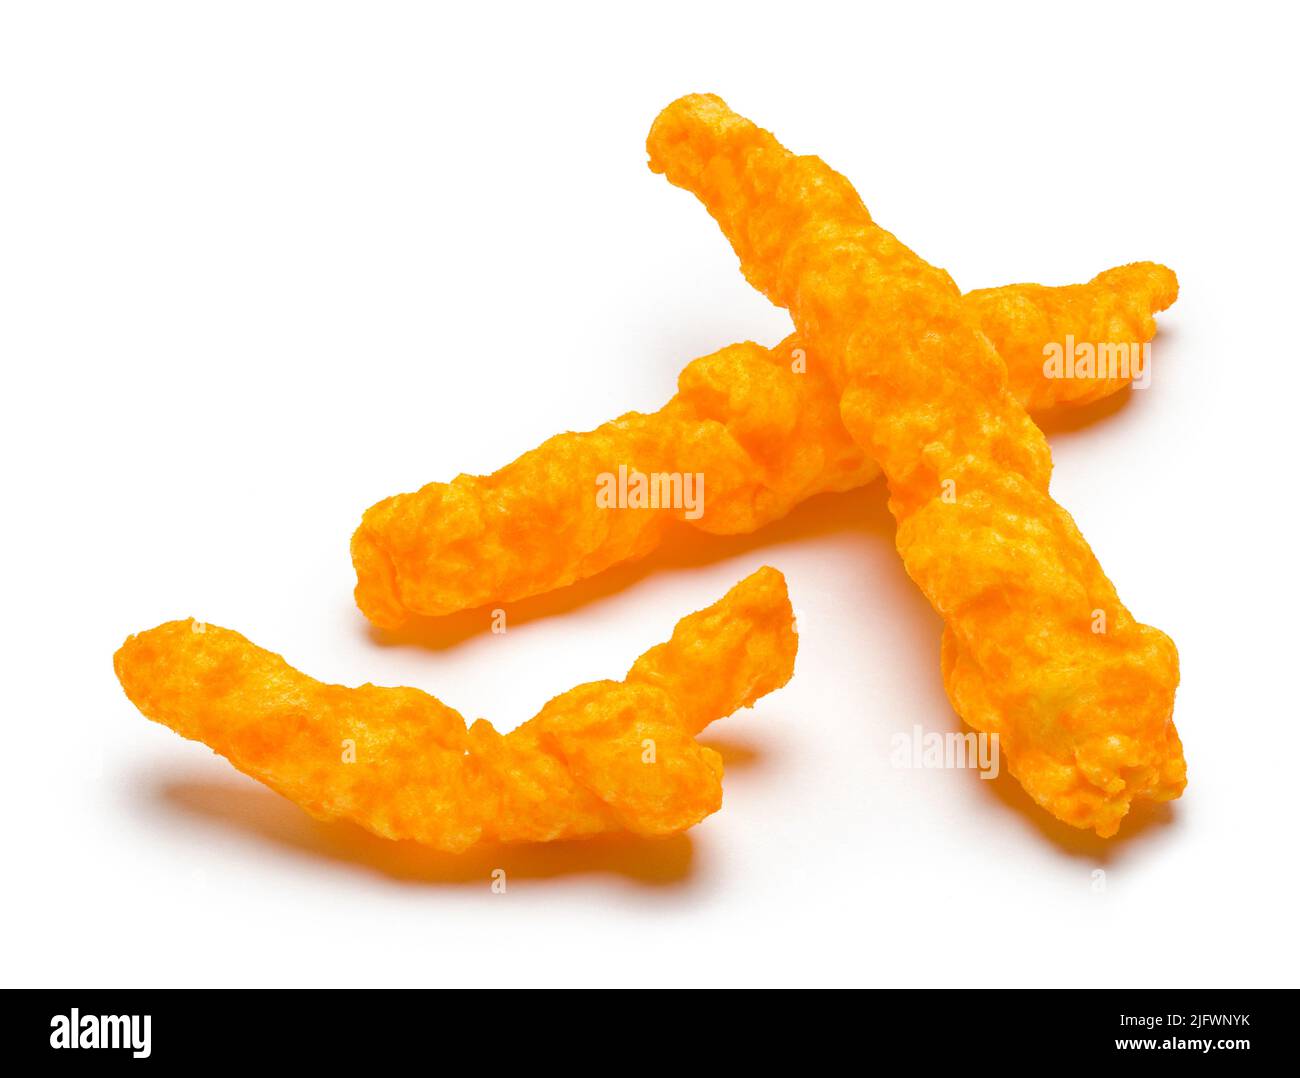 Three Crunchy Cheese Puffs Cut Out on White. Stock Photo